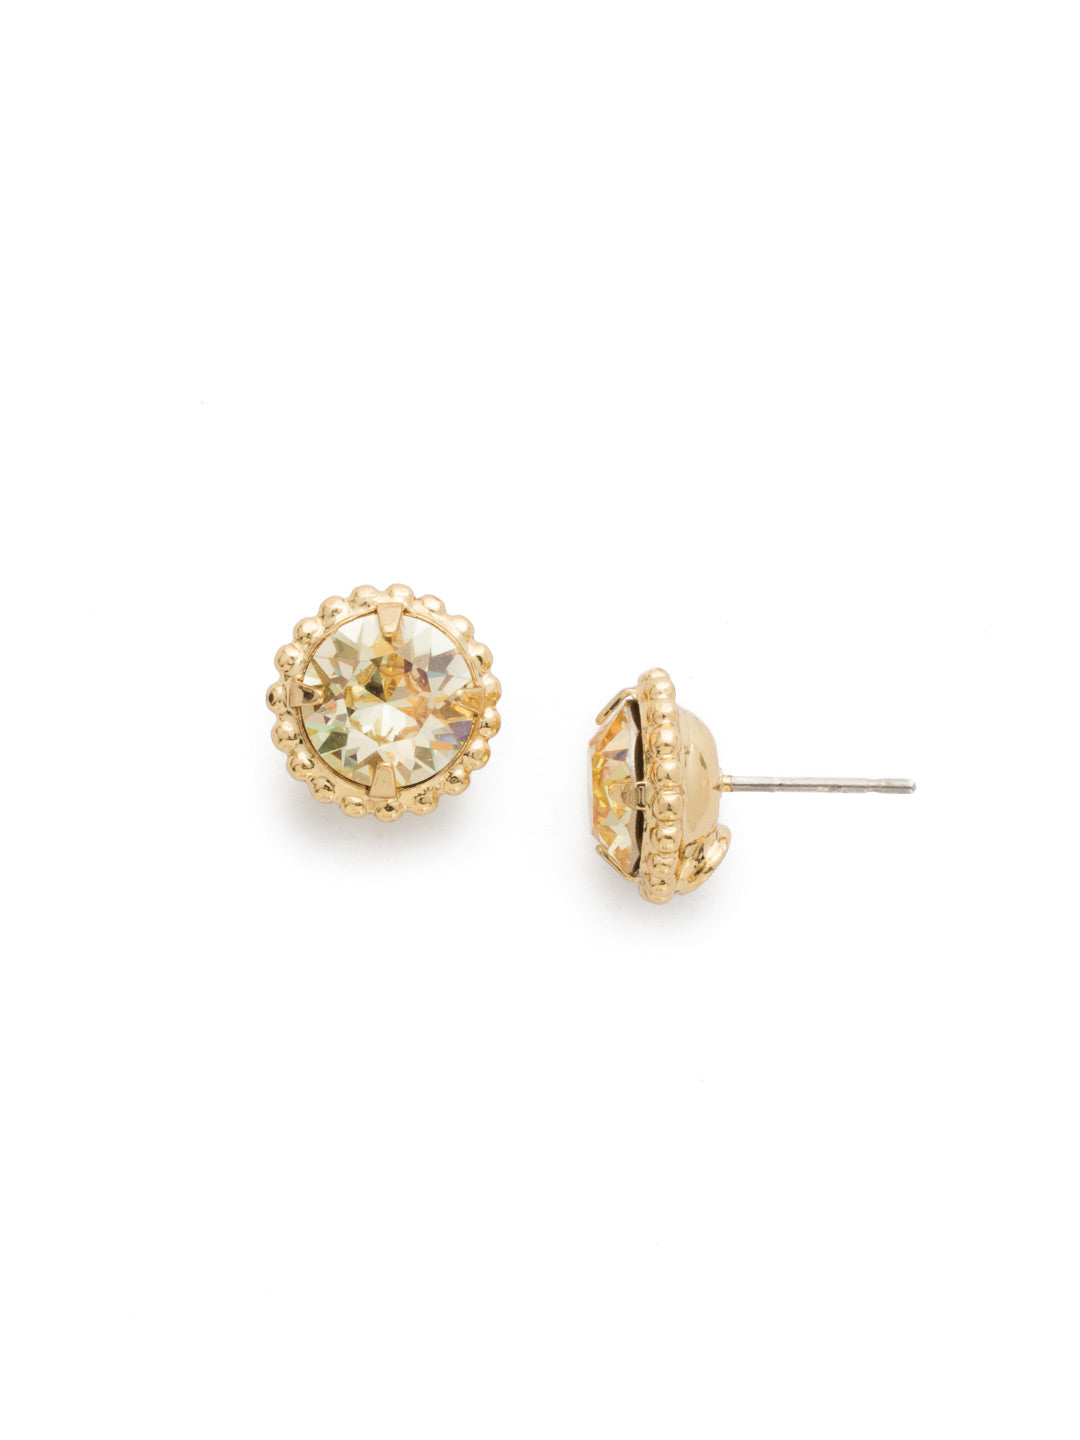 Simplicity Stud Earrings - EBY38BGCCH - <p>A timeless classic, the Simplicity Stud Earrings feature round cut crystals in a variety of colors; accented with a halo of metal beaded detail. Need help picking a stud? <a href="https://www.sorrelli.com/blogs/sisterhood/round-stud-earrings-101-a-rundown-of-sizes-styles-and-sparkle">Check out our size guide!</a> From Sorrelli's Crystal Champagne collection in our Bright Gold-tone finish.</p>